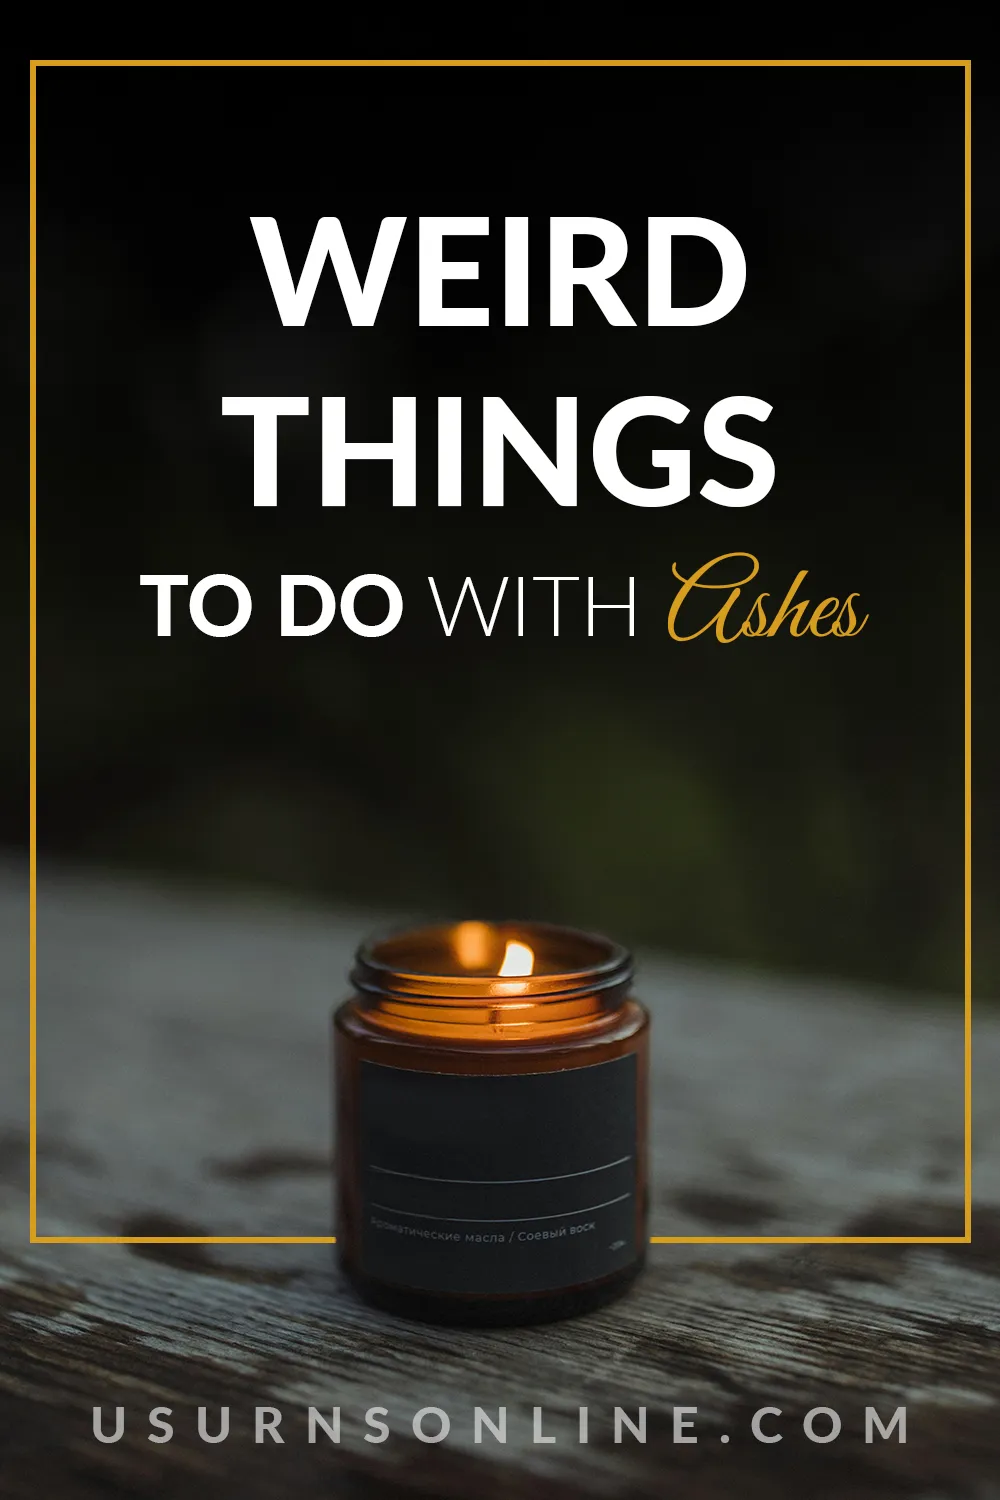 weird things to do with ashes - feature image